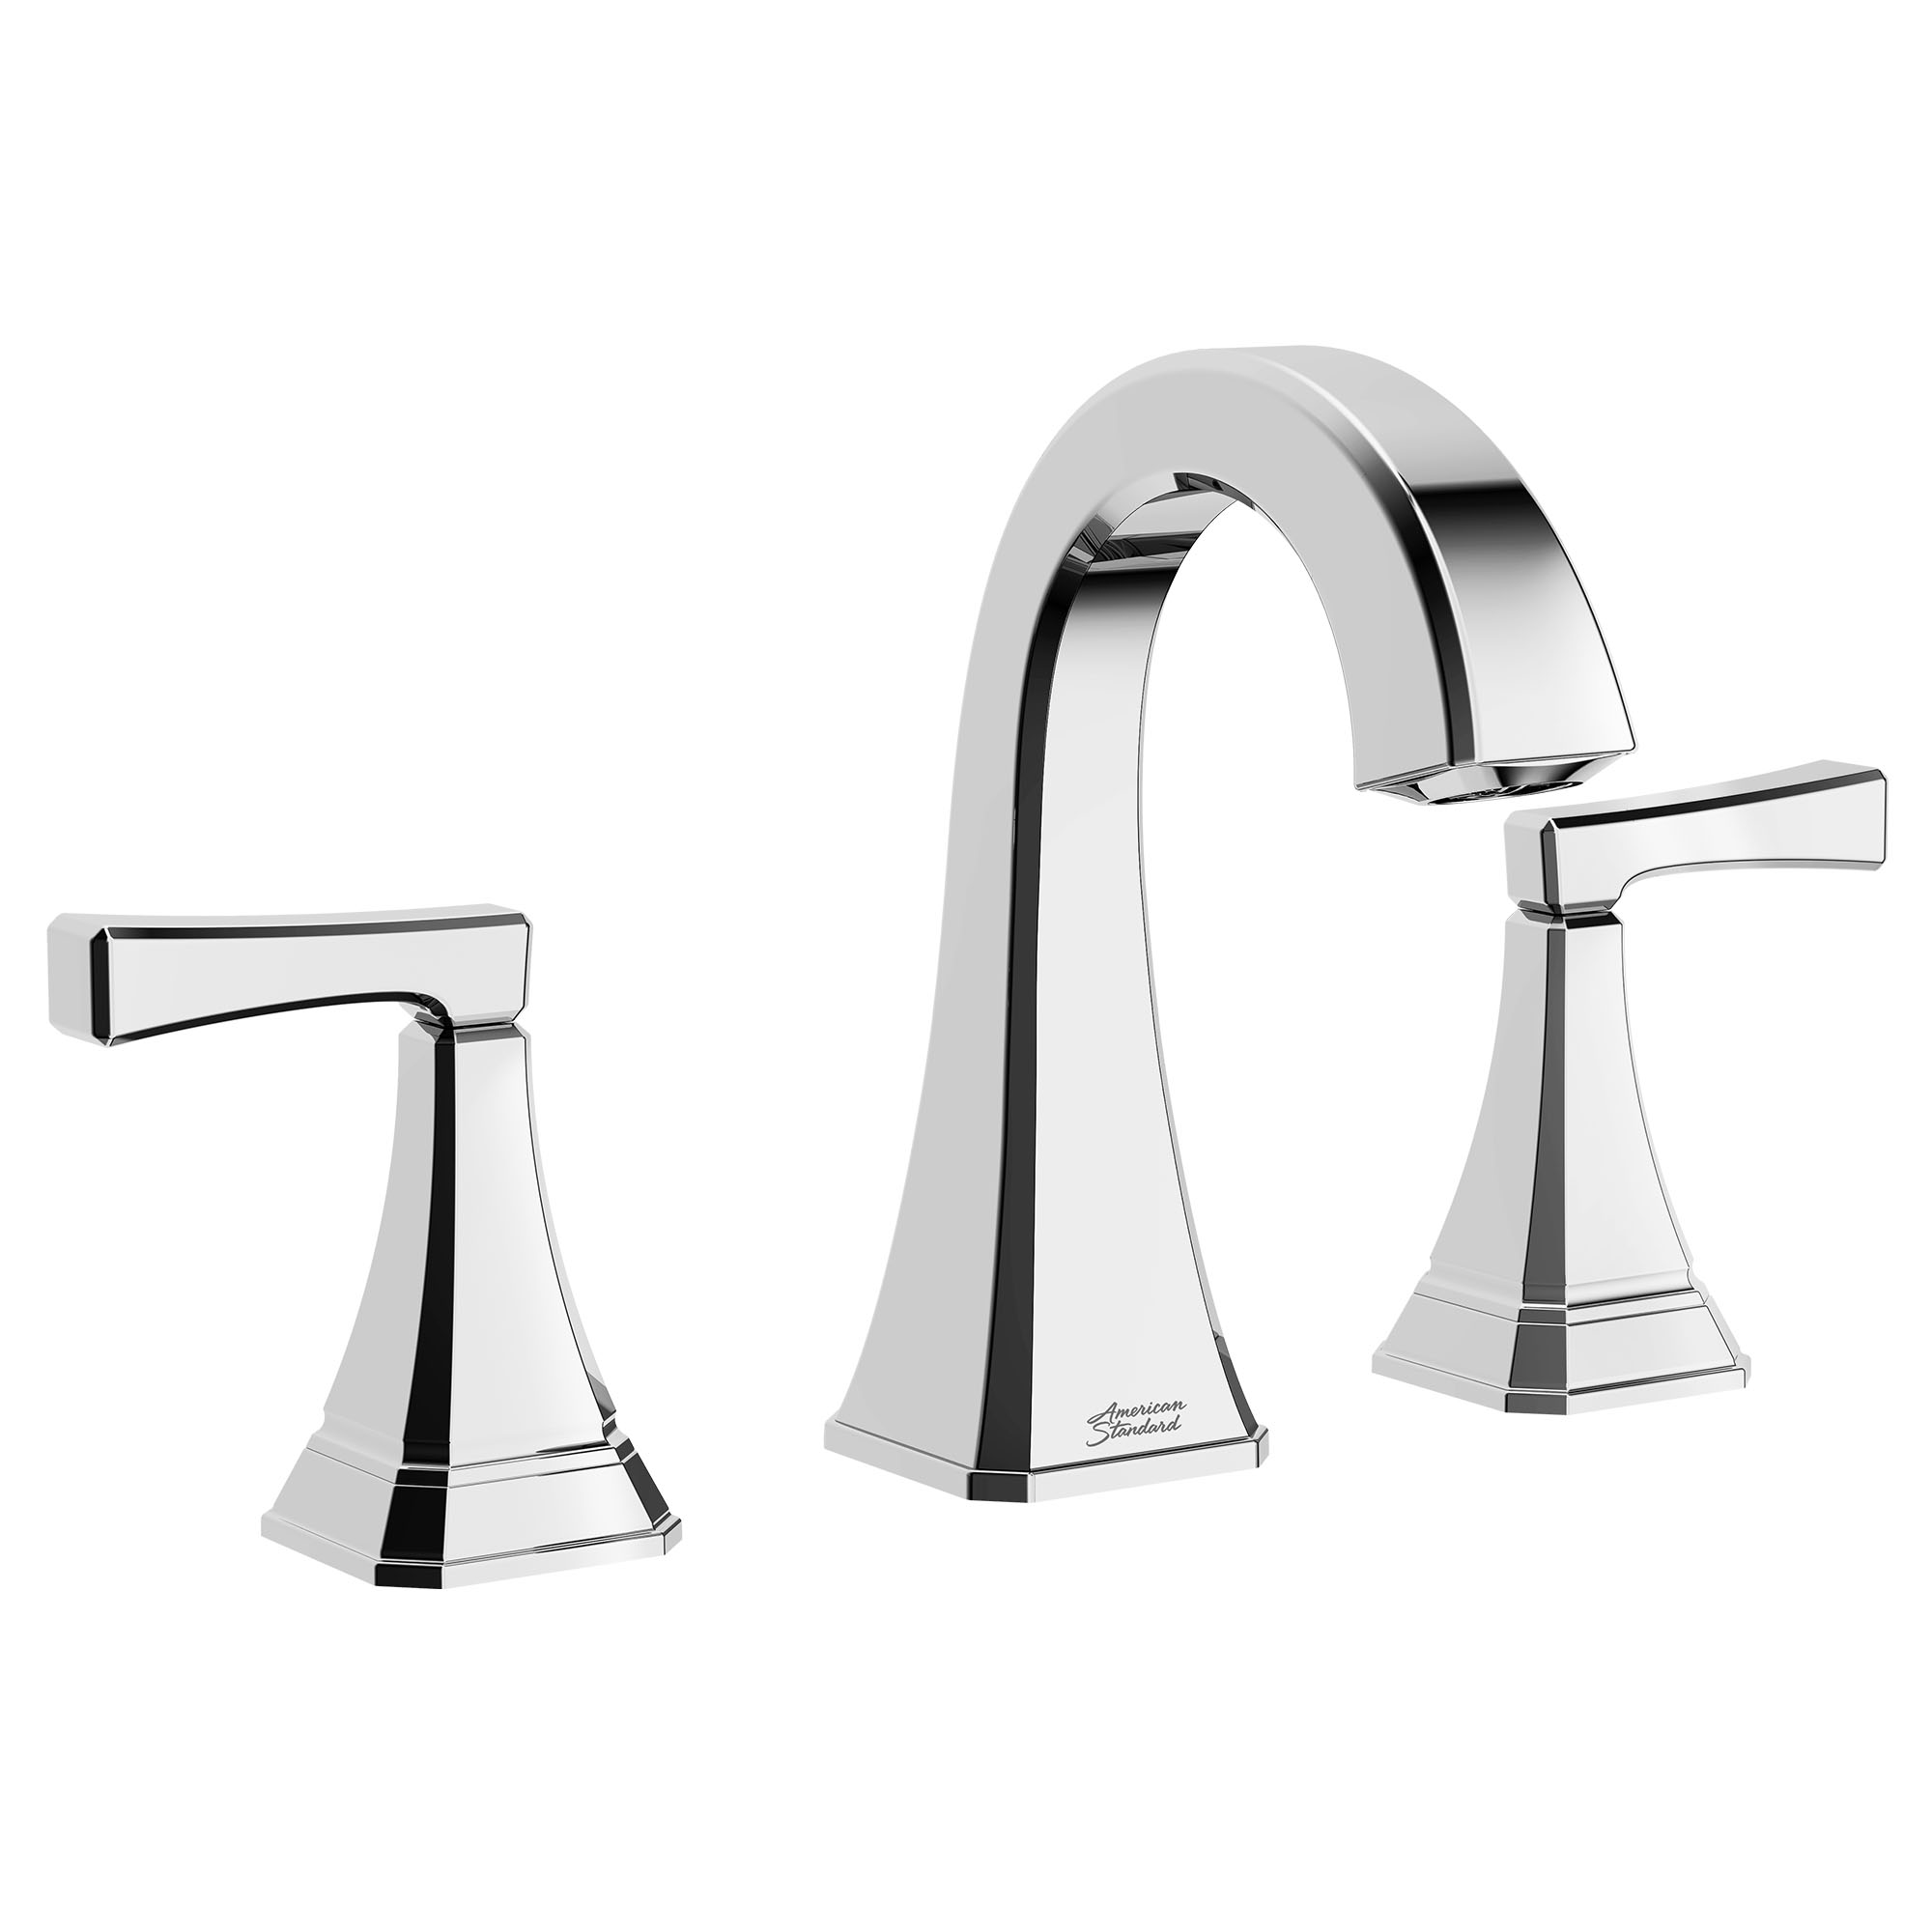 Crawford™ 8-Inch Widespread 2-Handle Bathroom Faucet 1.2 gpm/4.5 L/min With Lever Handles